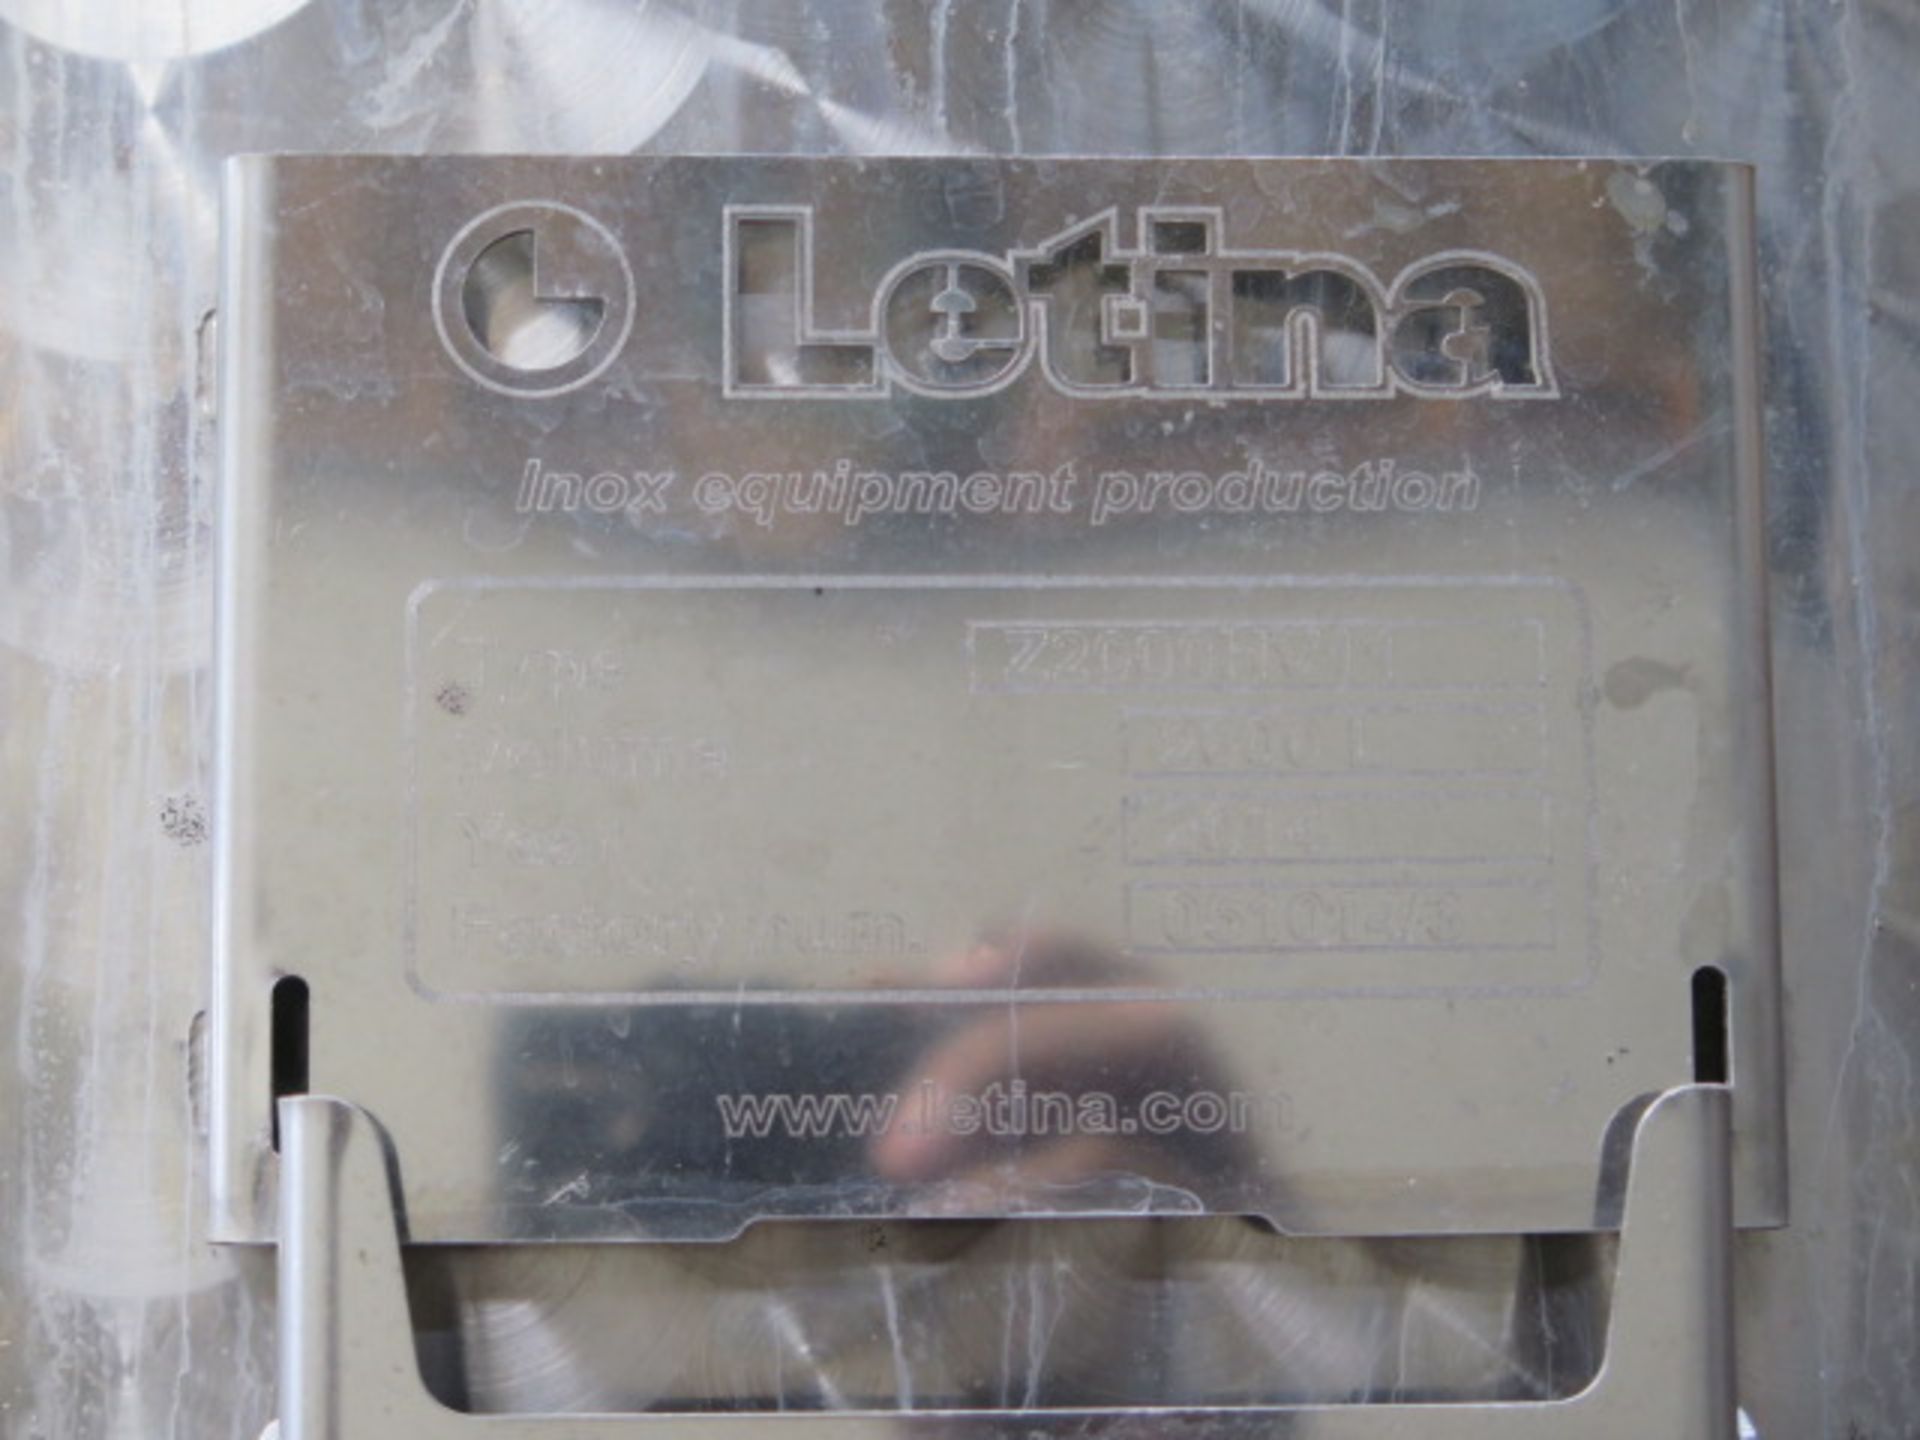 2014 Letina type Z2000HV11 2000 Liter Jacketed Closed Storage Tanks s/n 051014/3 (SOLD AS-IS - NO - Image 10 of 10